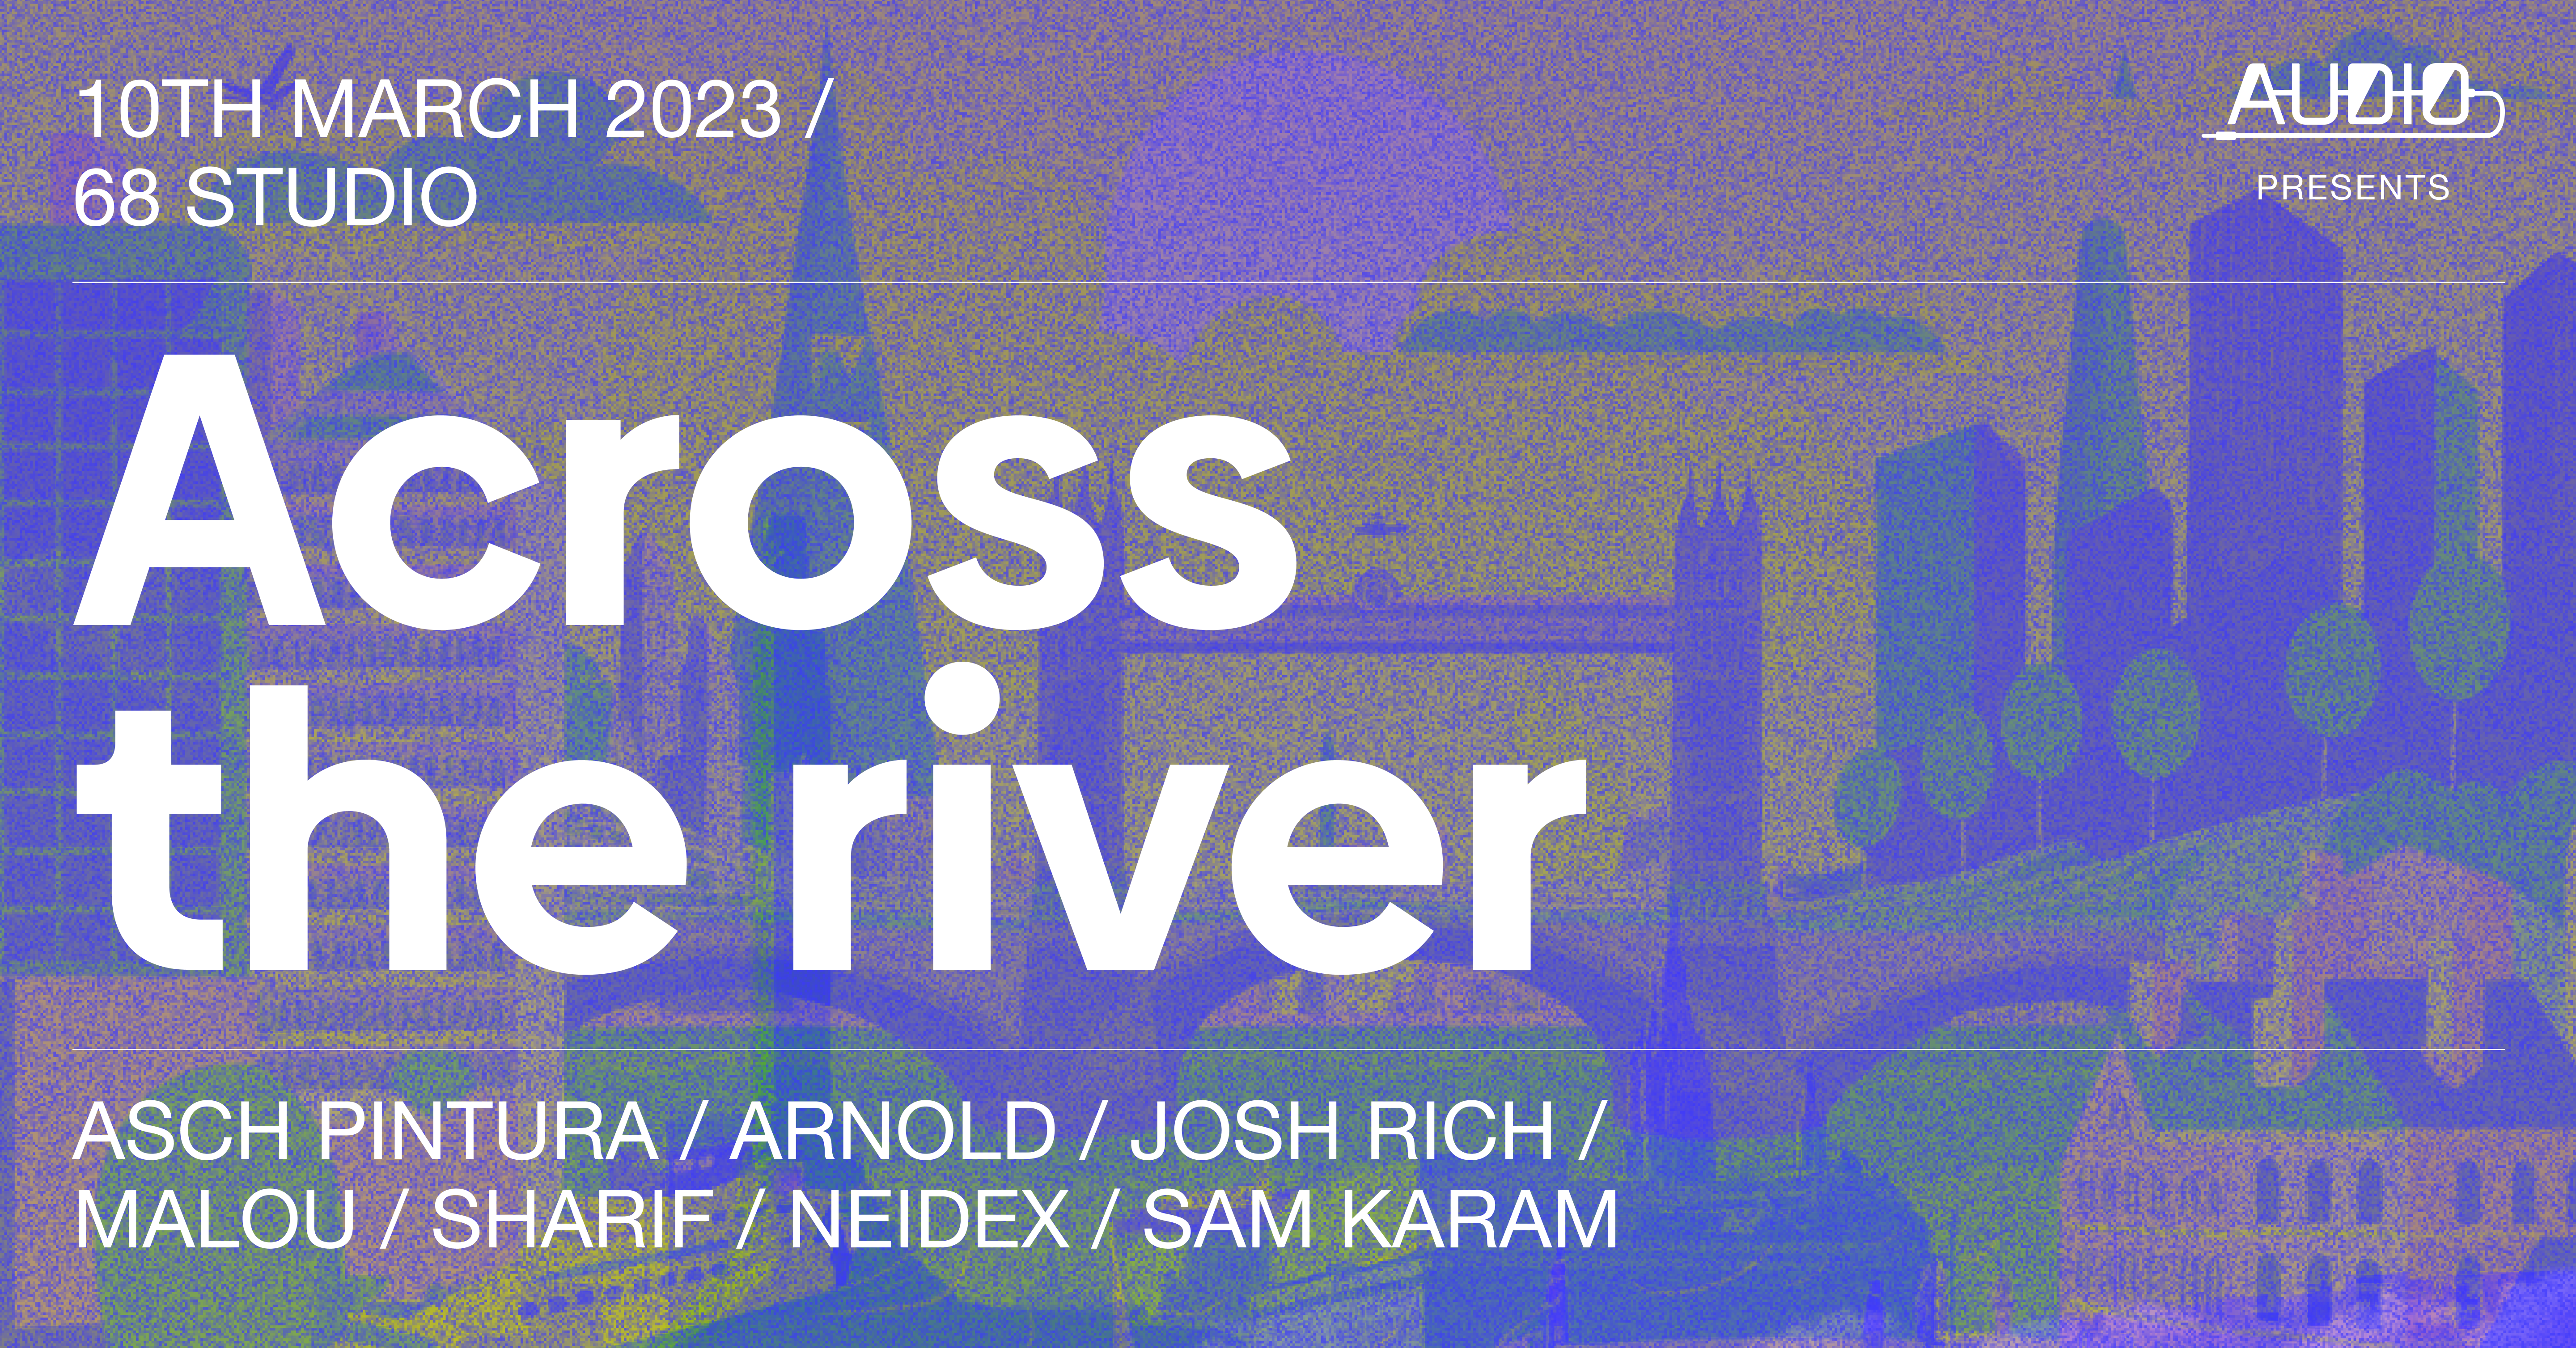 Audio presents: Across The River [SOLD OUT] - Página frontal